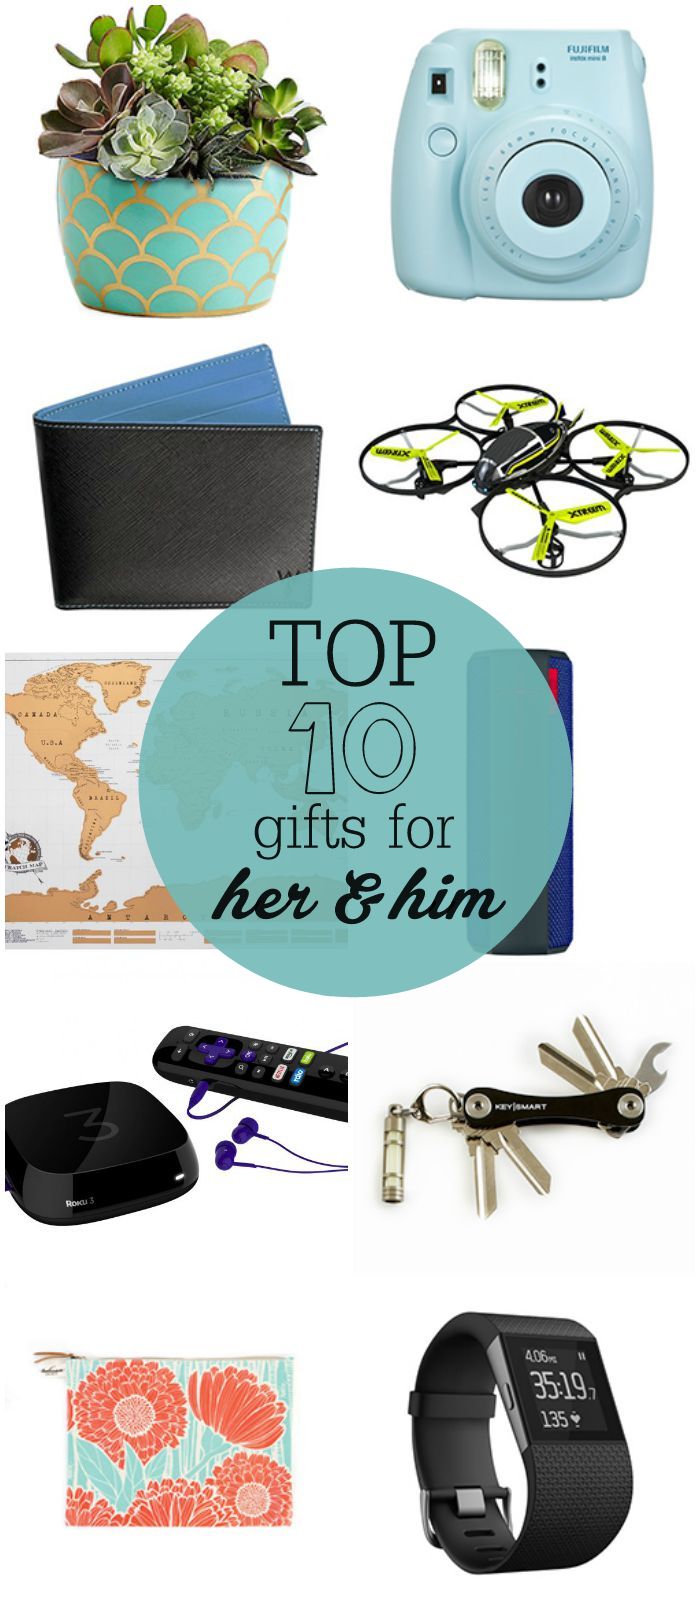 TOP 10 Gifts for Her and Him - perfect for birthdays, special days or the holidays!!